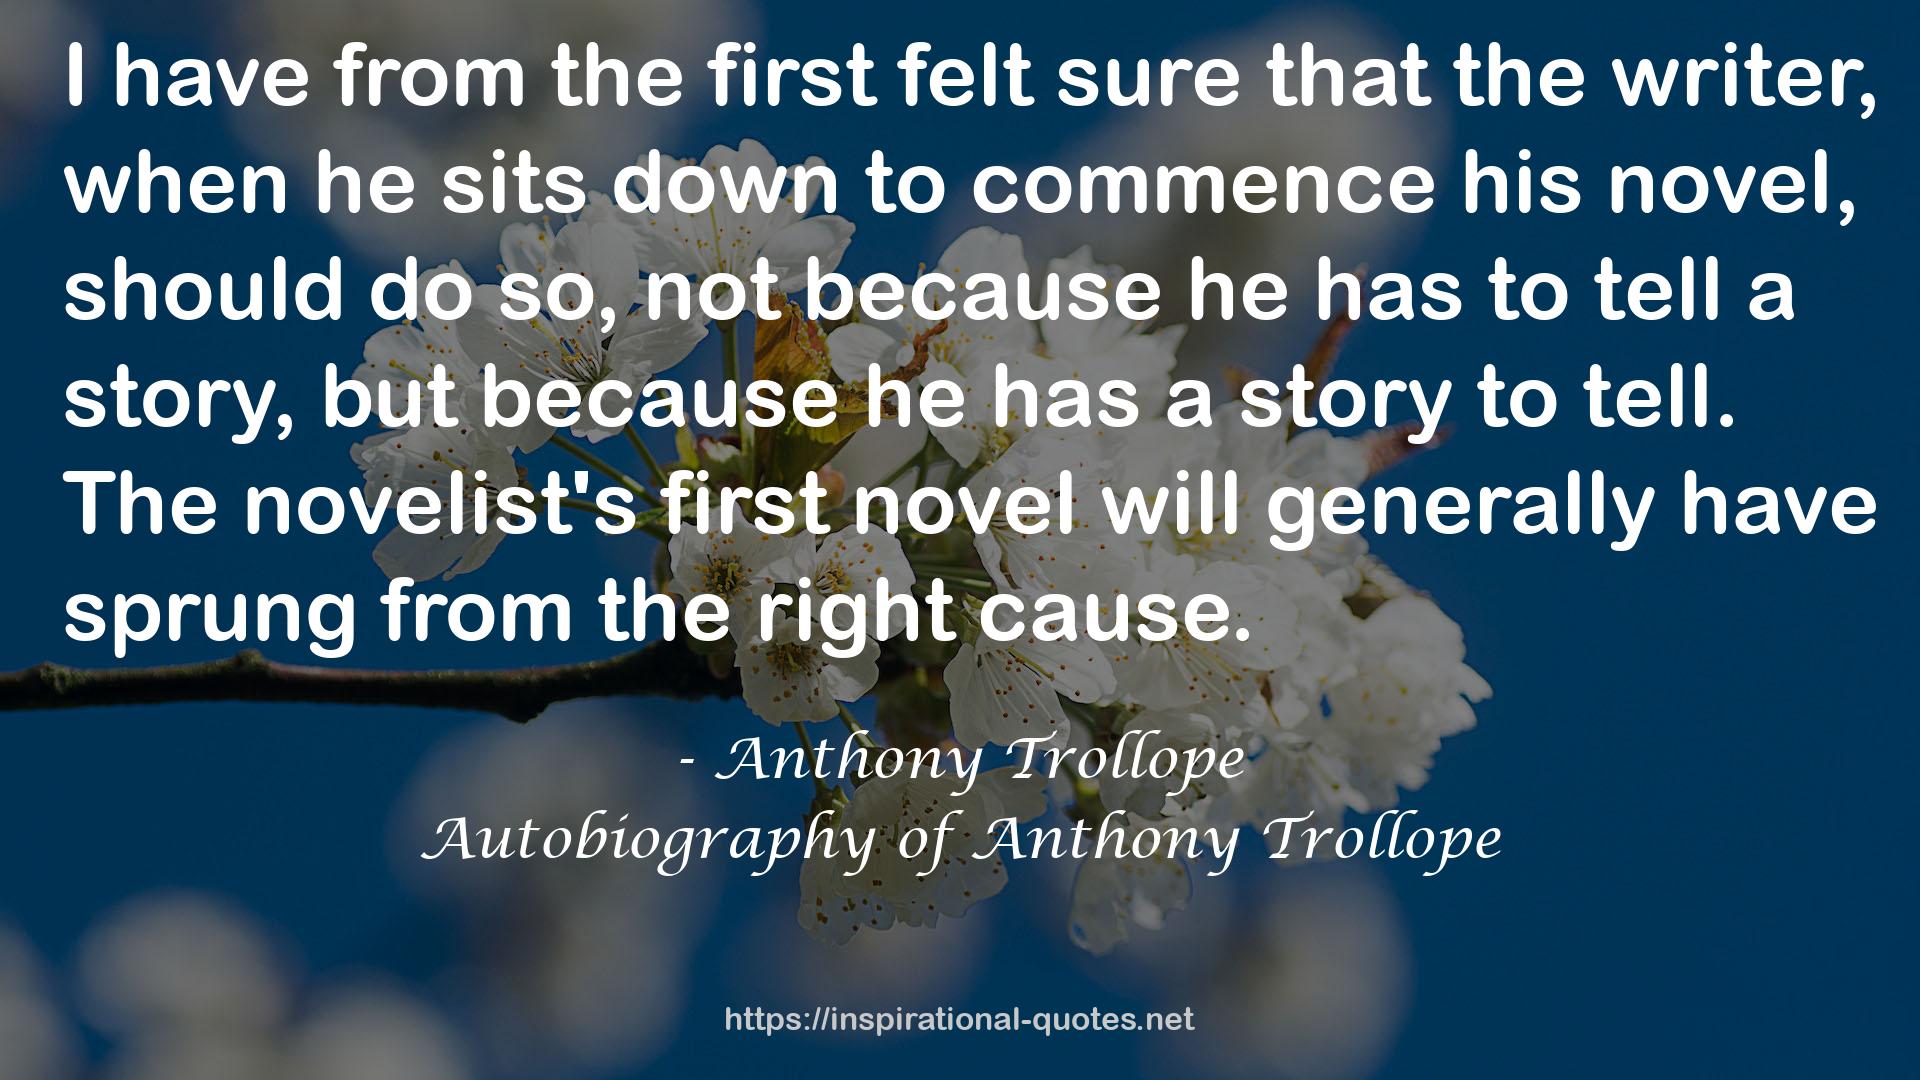 Autobiography of Anthony Trollope QUOTES